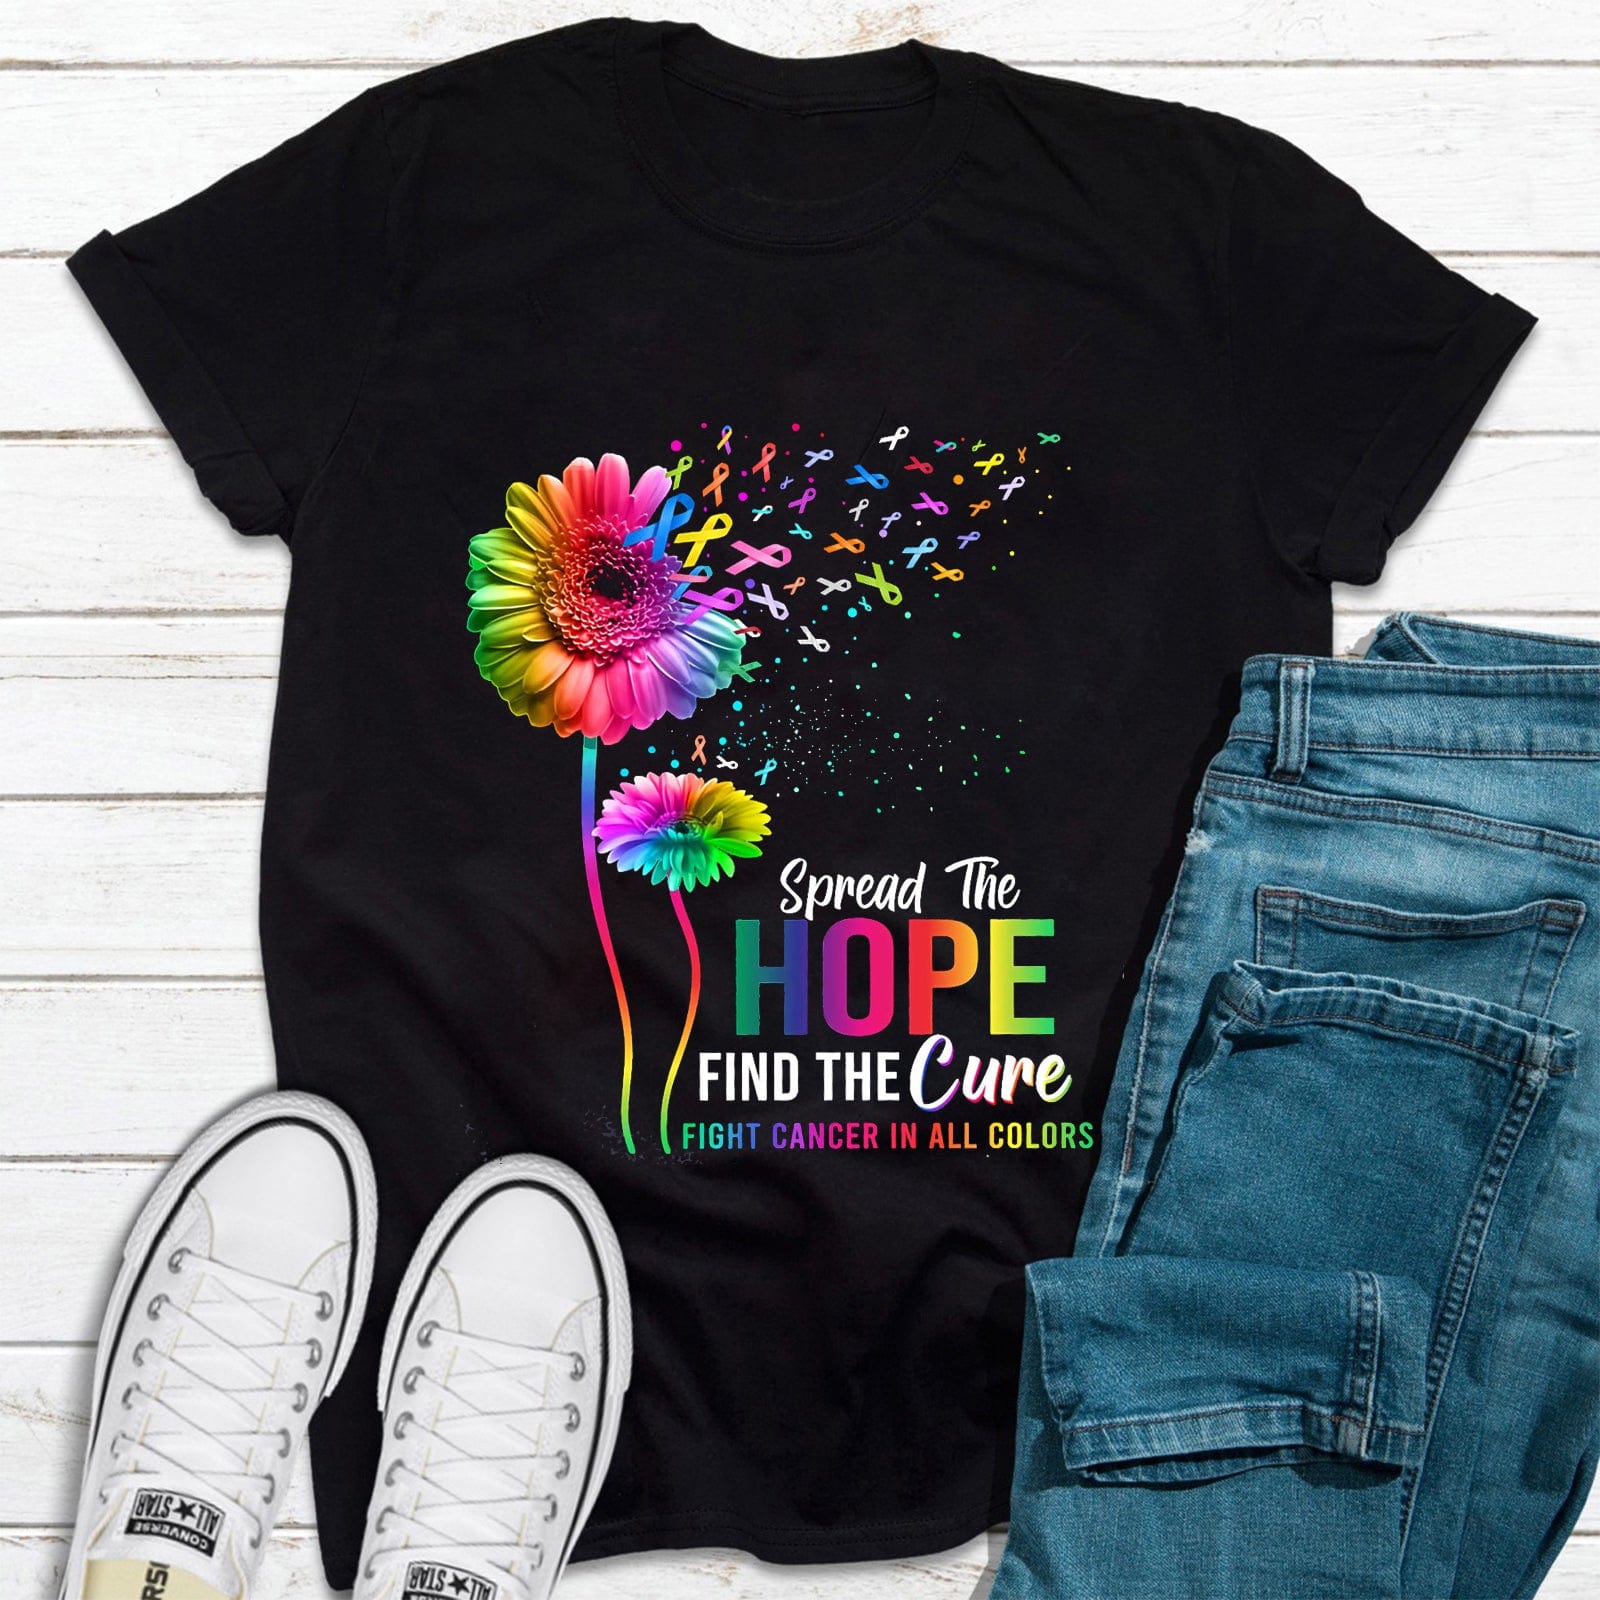 Spread The Hope, Find The Cure Dandelion Fight Cancer Awareness Shirt